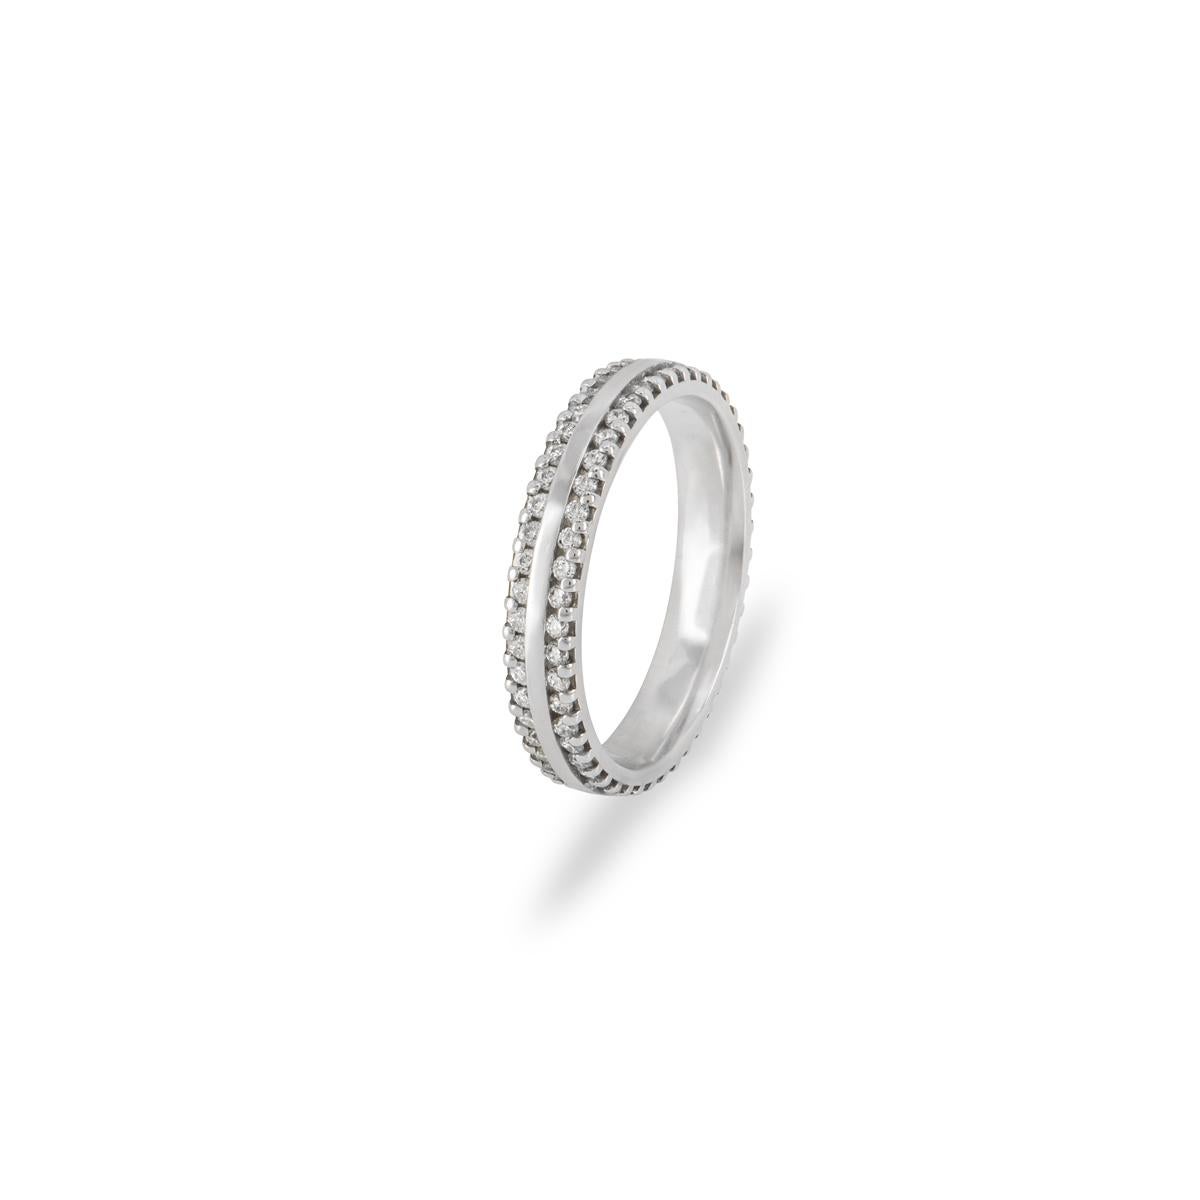 A unisex platinum diamond full eternity band. The wedding ring features two rows each pave set to the edges with 46 round brilliant cut diamonds with a combined total weight of 0.53ct, G-I colour and SI clarity. The 3.20mm ring is a size UK I - EU